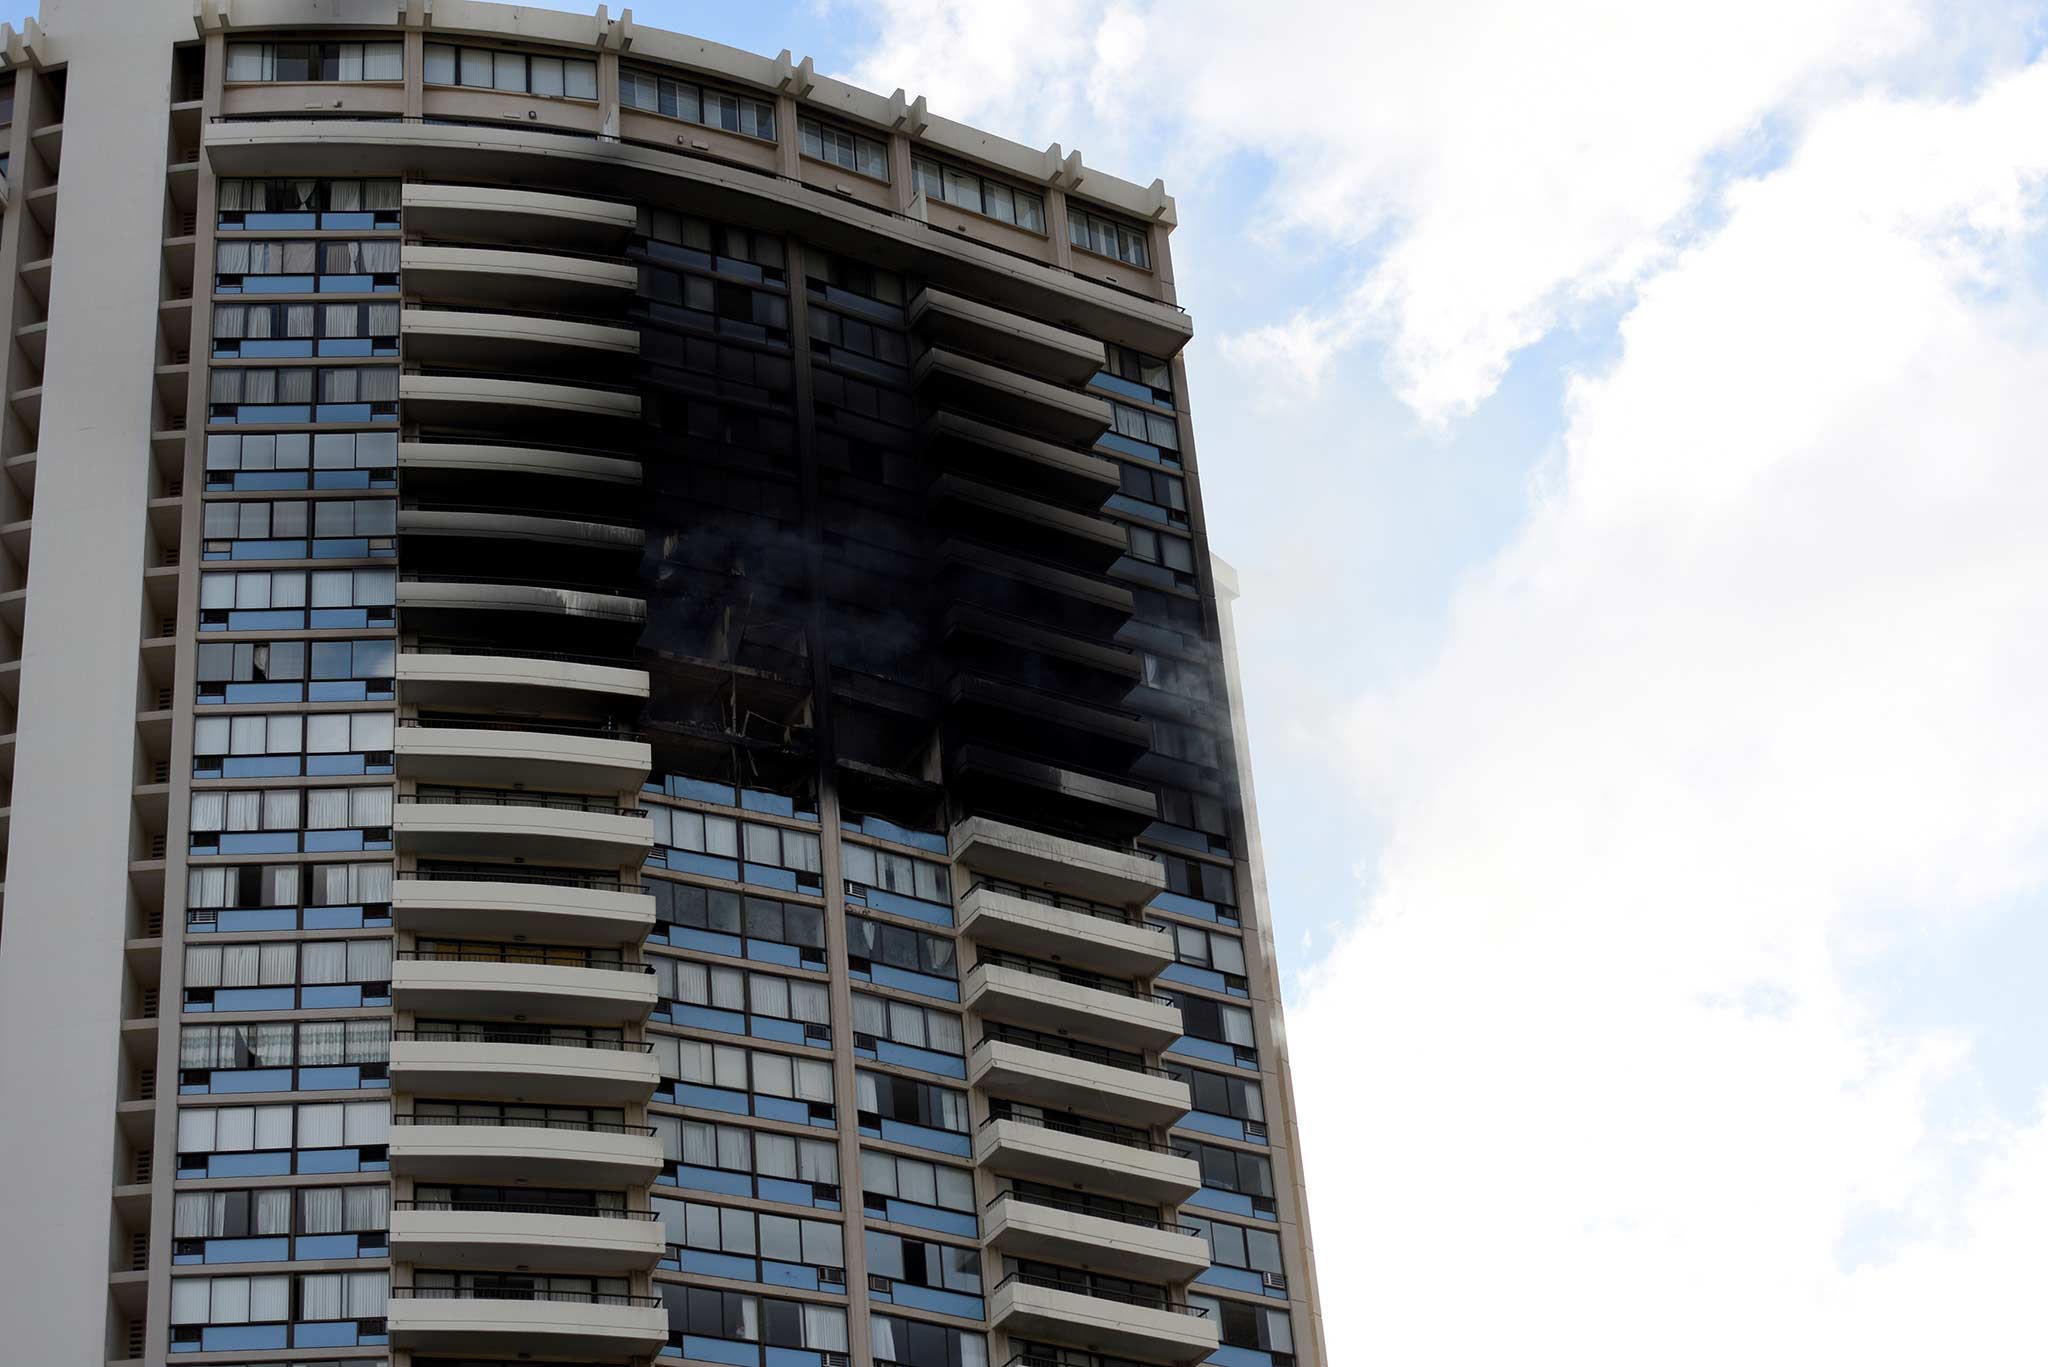 The Marco Polo apartment building after a fire broke out in it in Honolulu, Hawaii,